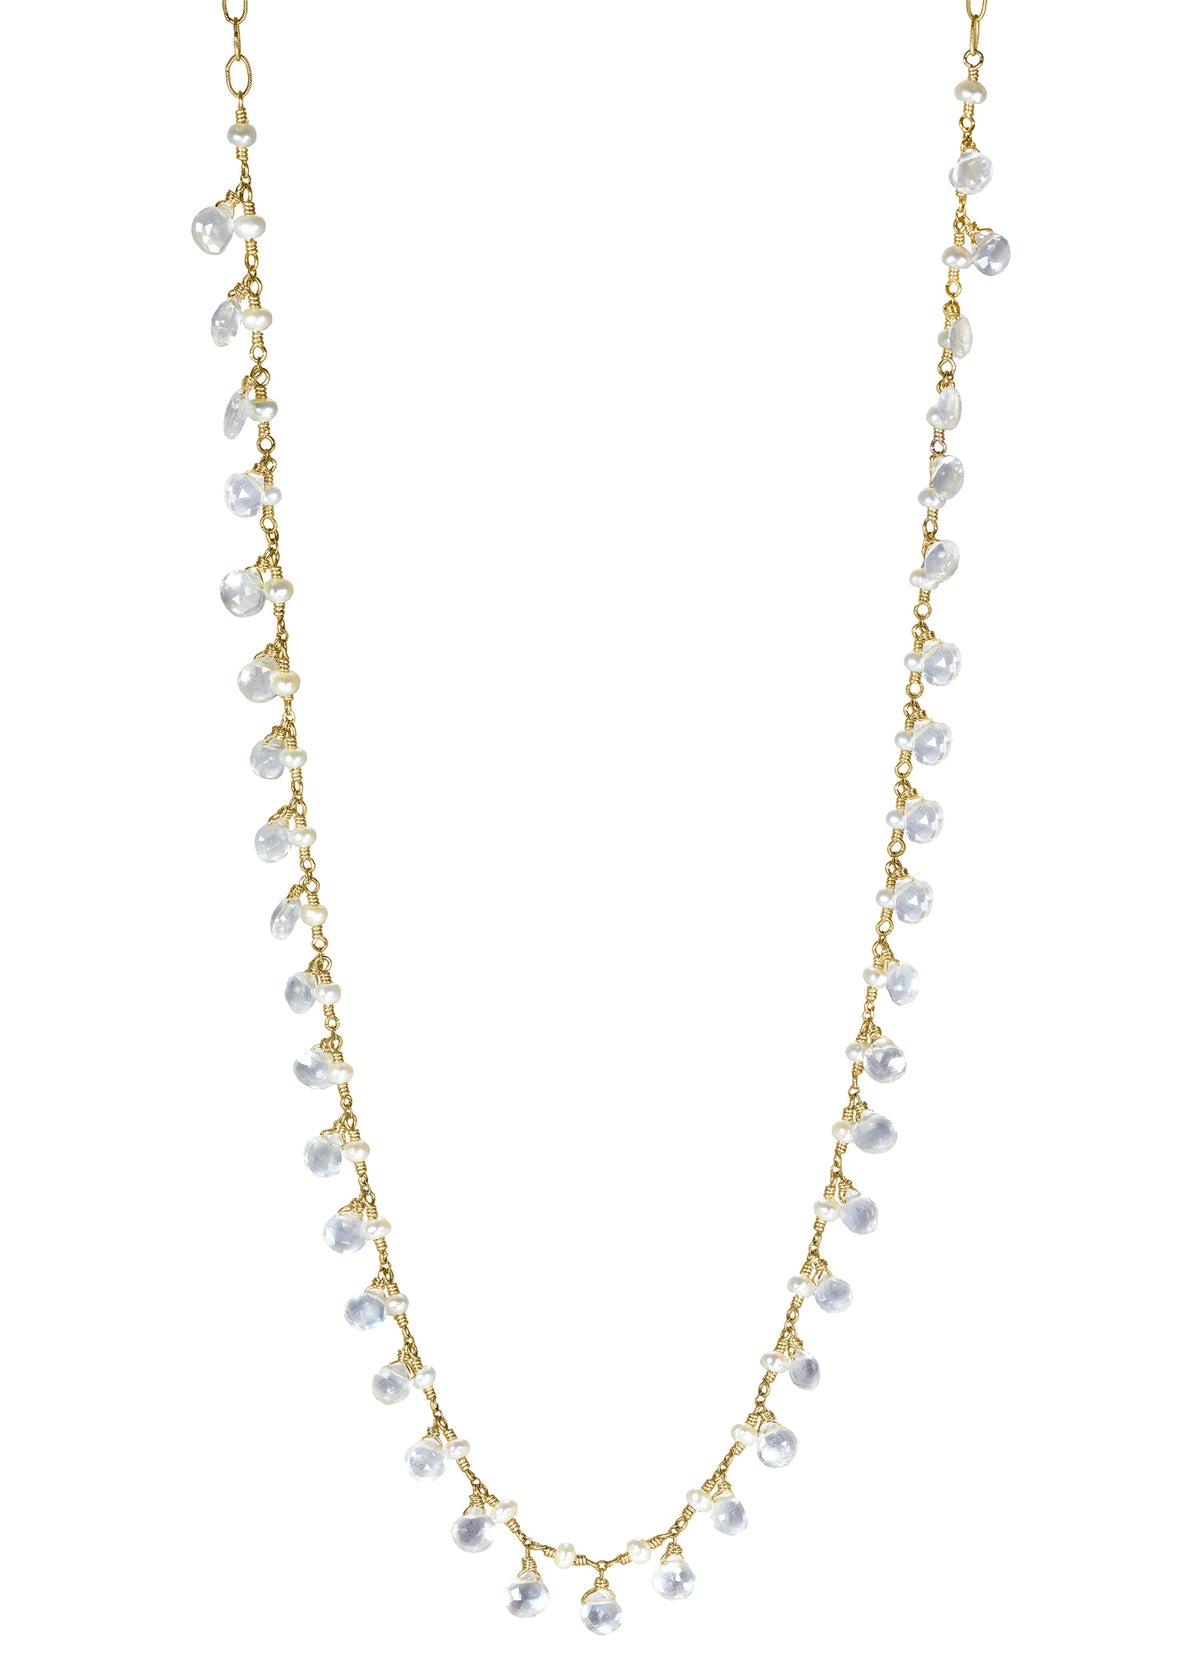 White moonstone Freshwater pearl 14k gold fill Necklace measures 18-1/4&quot; in length (including a 3&quot; extender) Moonstone drops measure 3/16&quot; Handmade in our Los Angeles studio